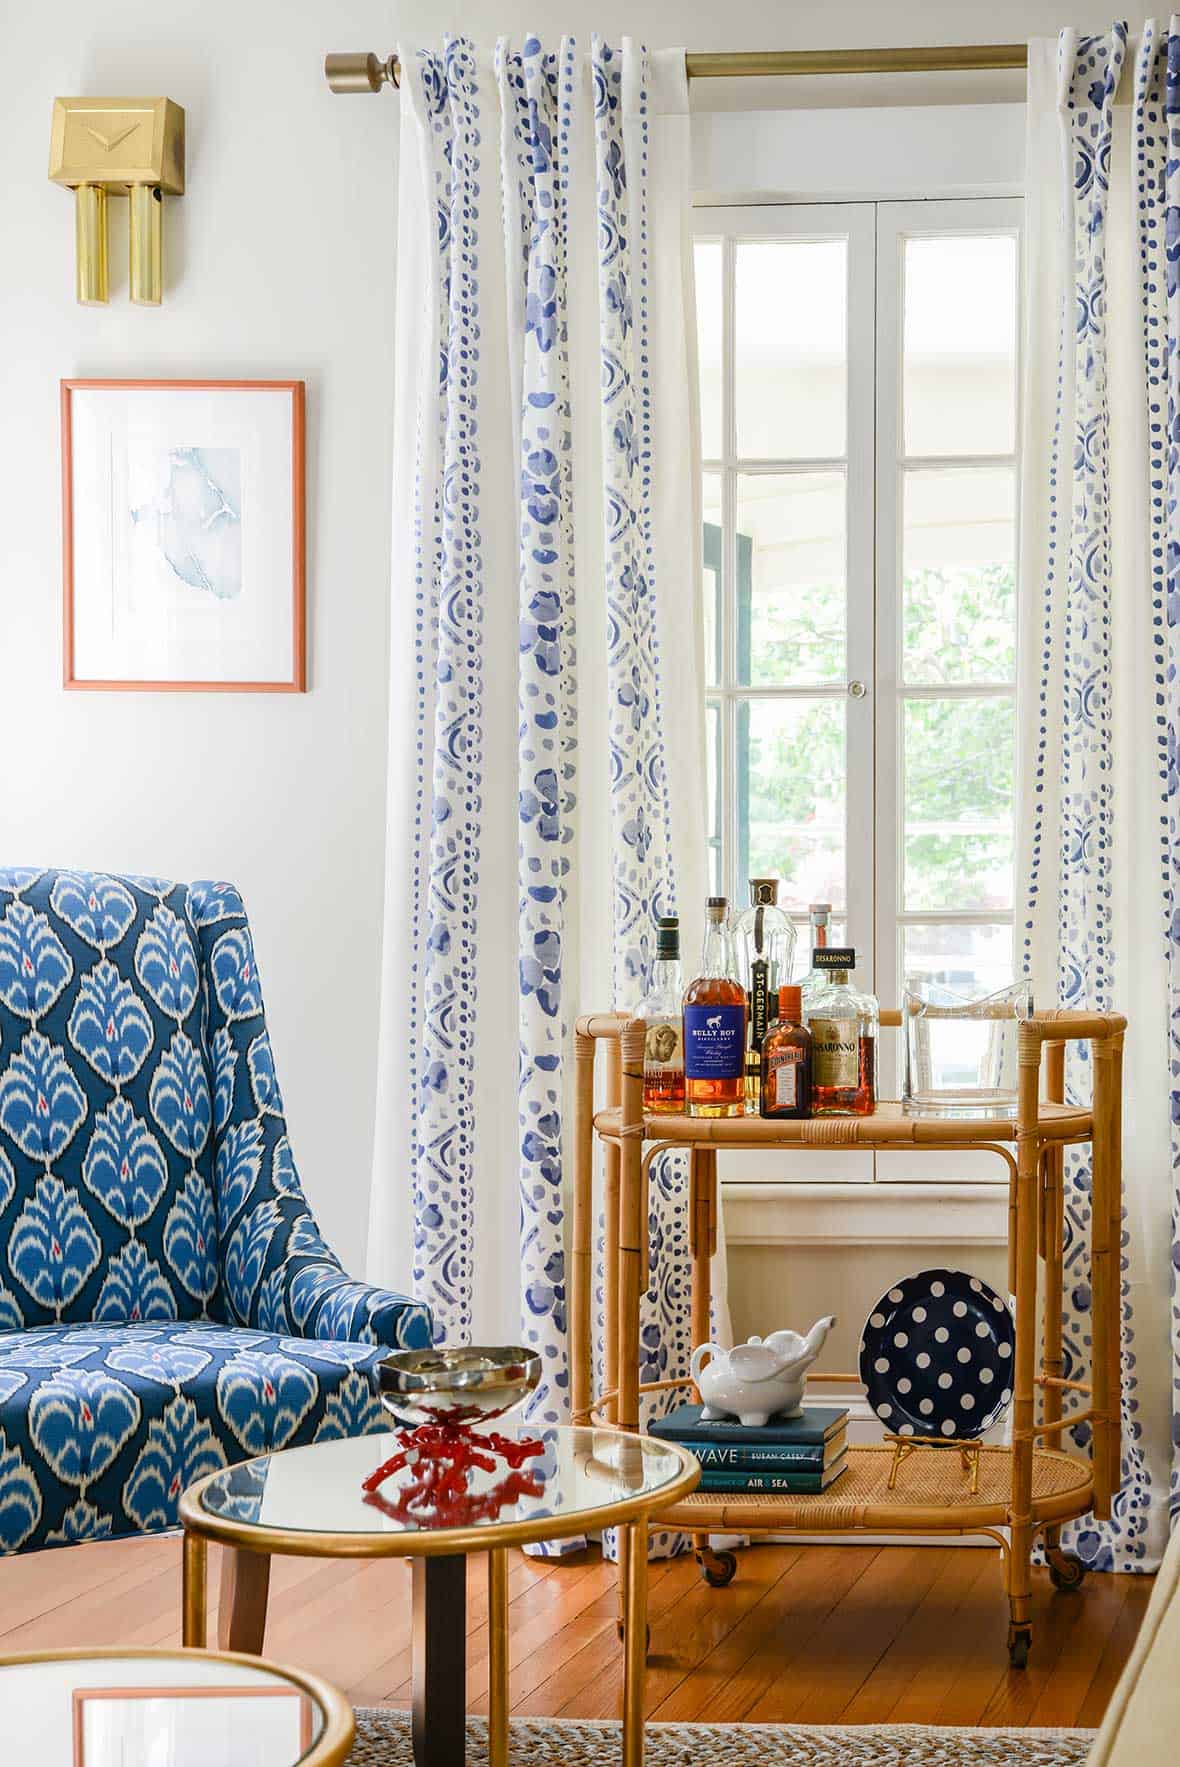 Chairs in navy ikat fabric by Pindler